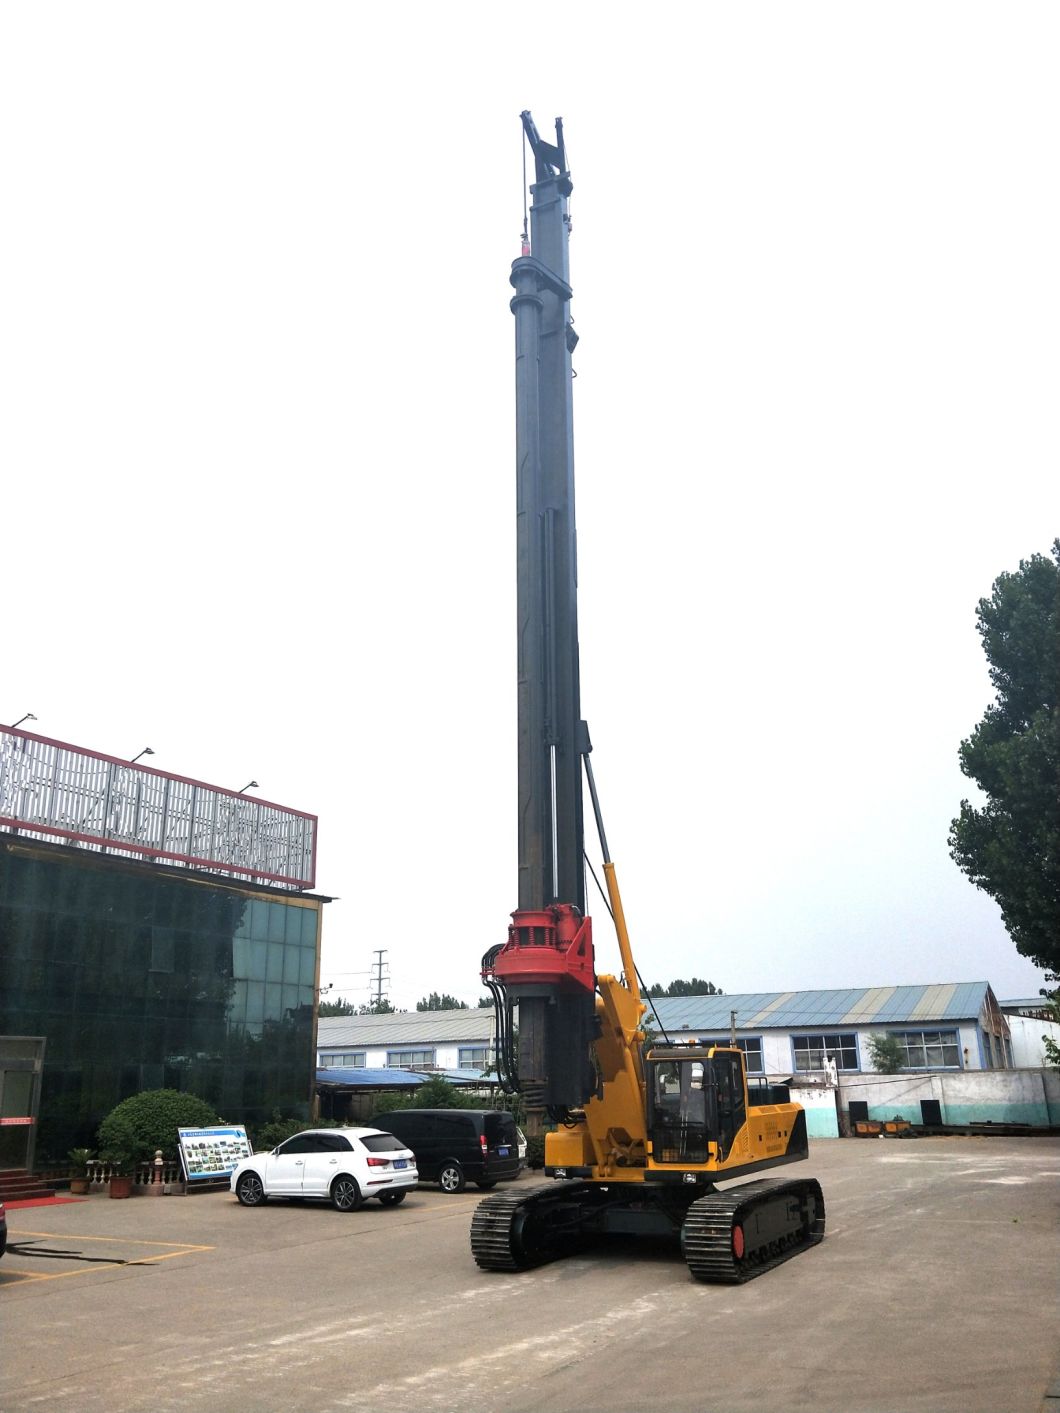 50 Meters Full Hydraulic Crawler Type Rotary Drilling Rig Adopt Pressurized Drilling Mode, Enabling Drilling Machine